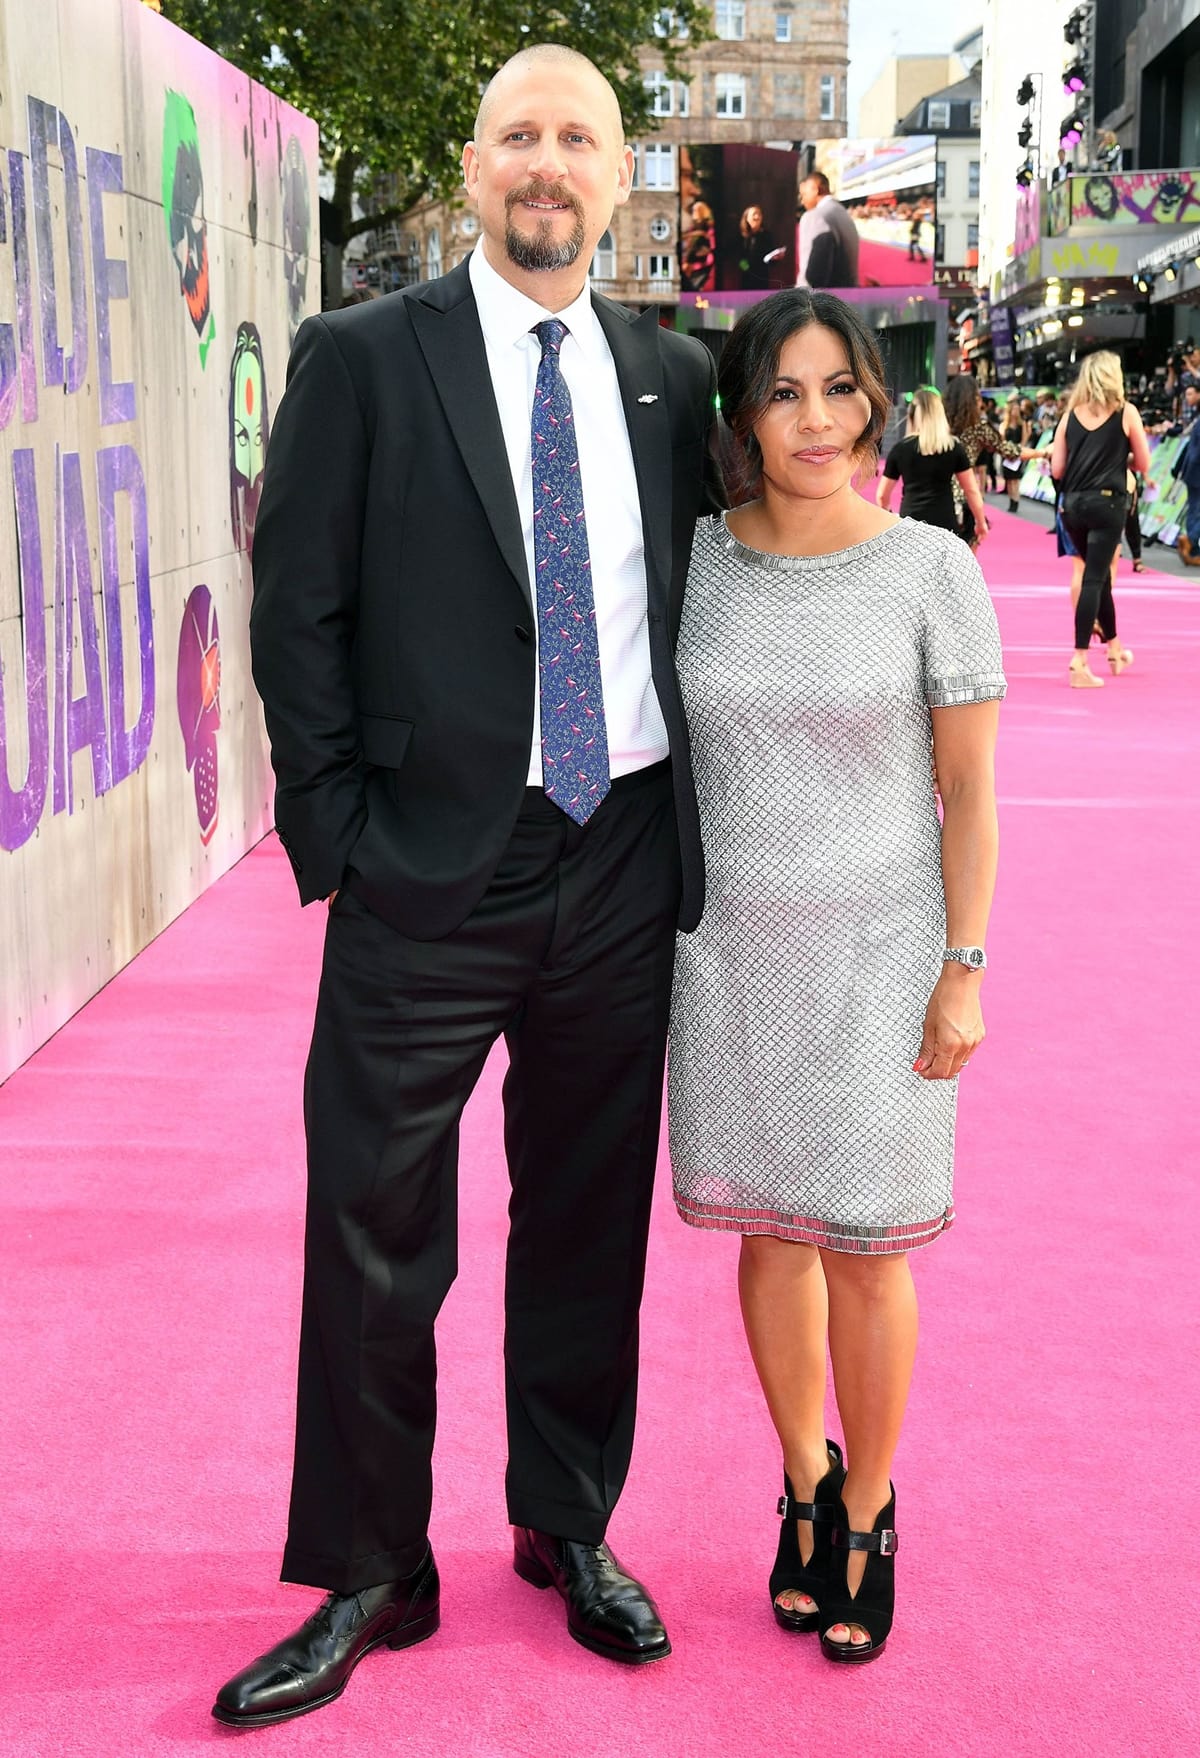 US director David Ayer and his much shorter wife Mireya Ayer at the European premiere of the film Suicide Squad